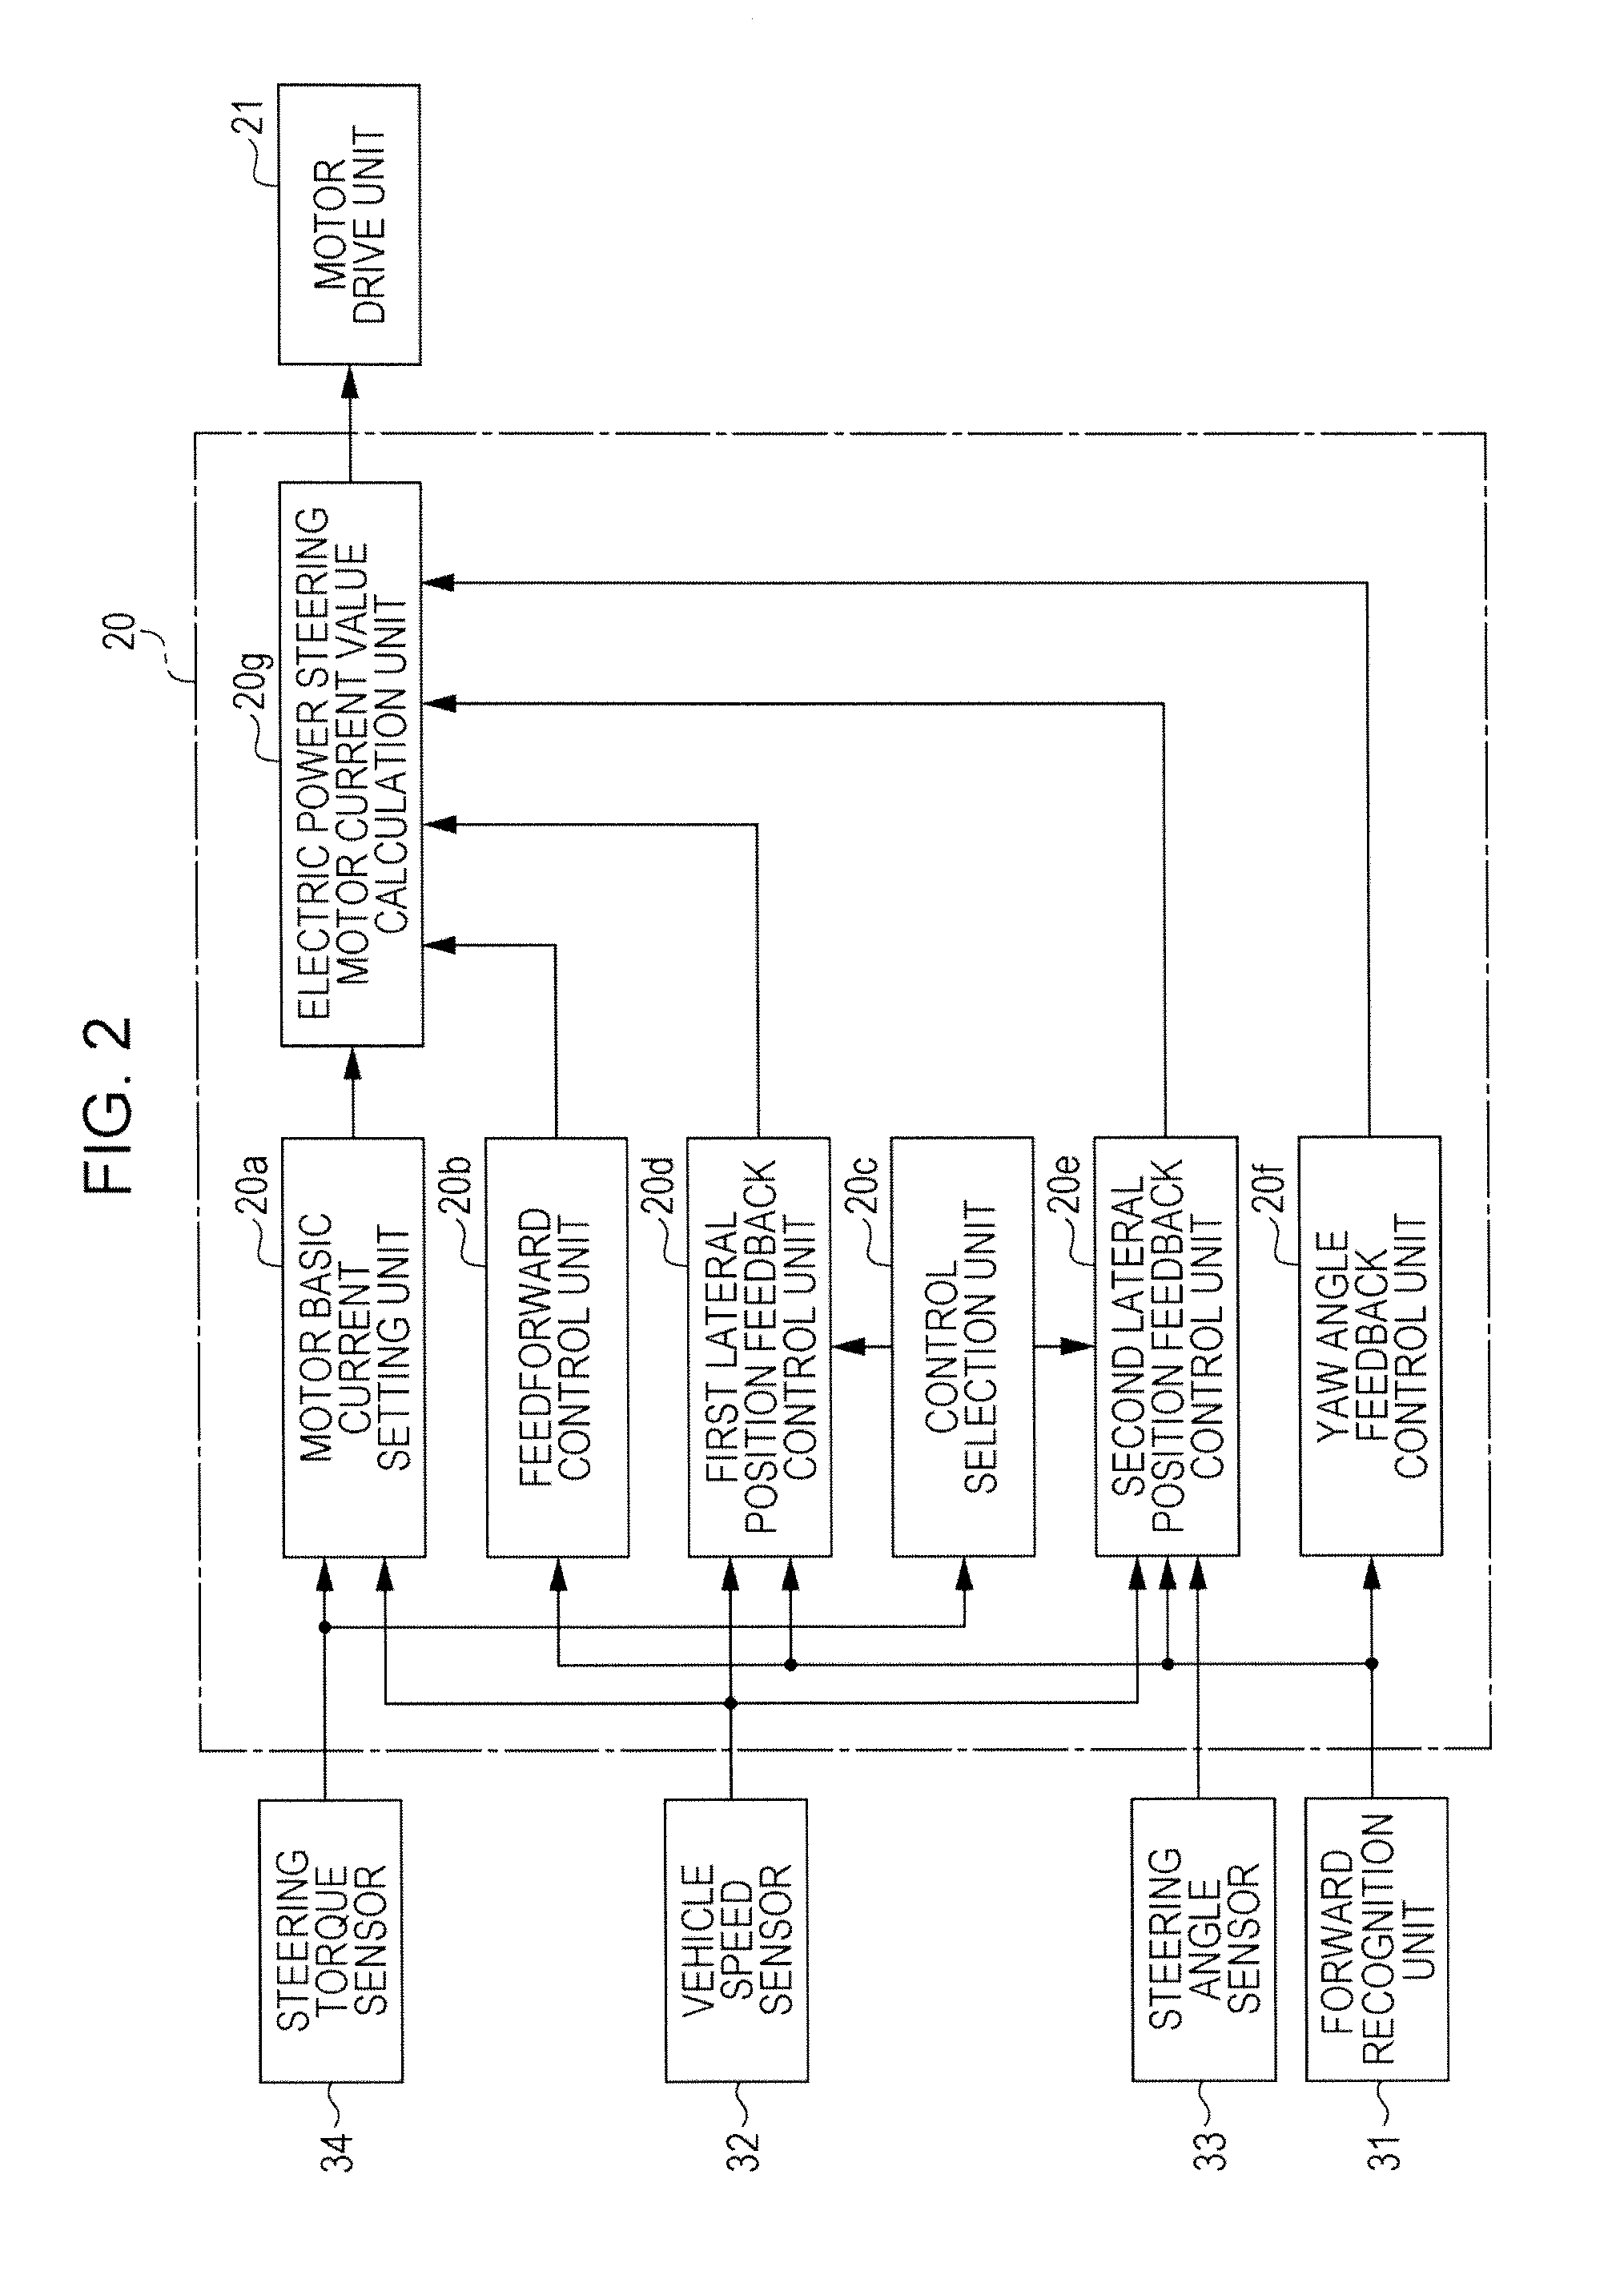 Lane keeping control system for vehicle